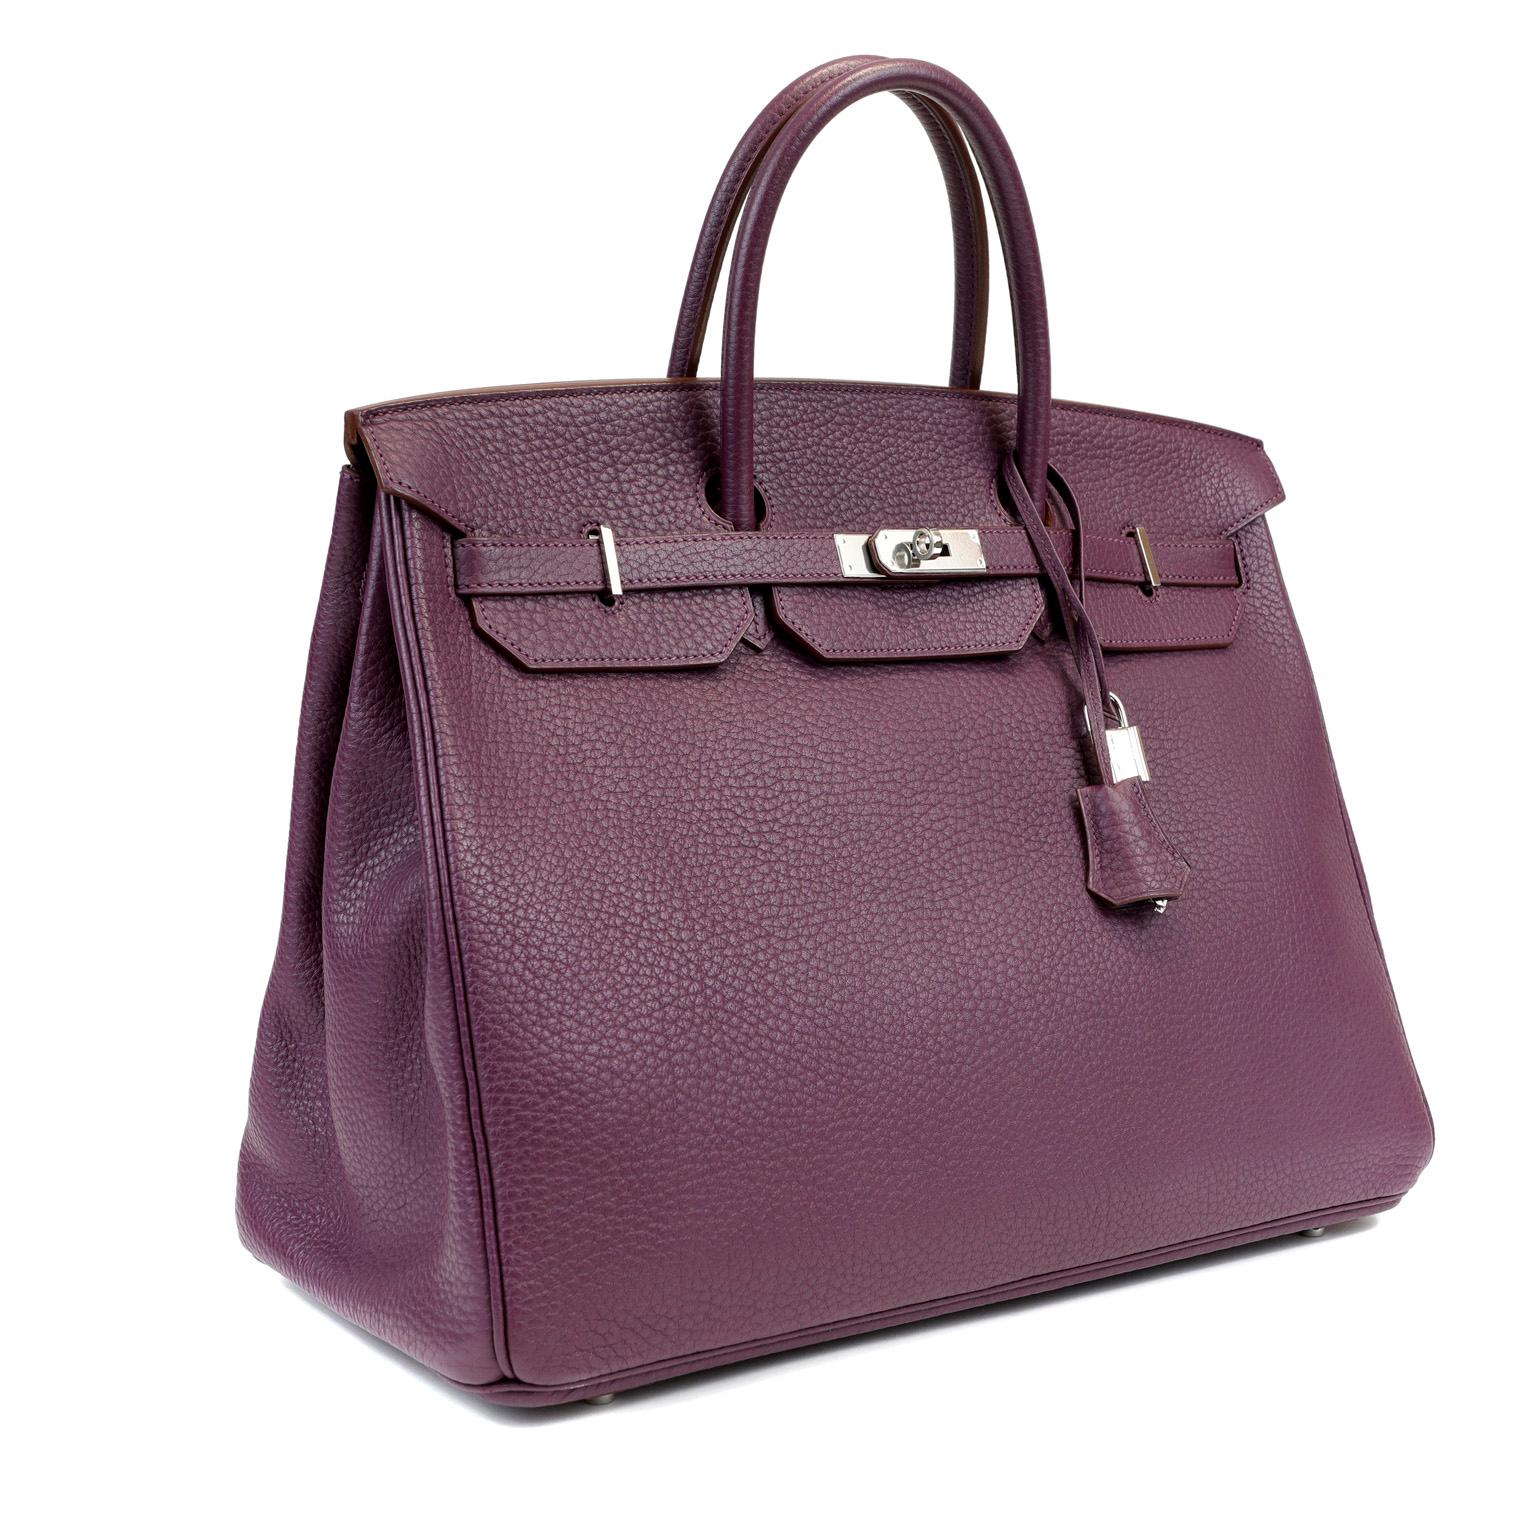 This authentic Hermès Violet Clemence 50 cm Birkin is in pristine condition with the protective plastic intact on the Palladium hardware. Hermès bags are considered the ultimate luxury item the world over.  Hand stitched by skilled craftsmen, wait